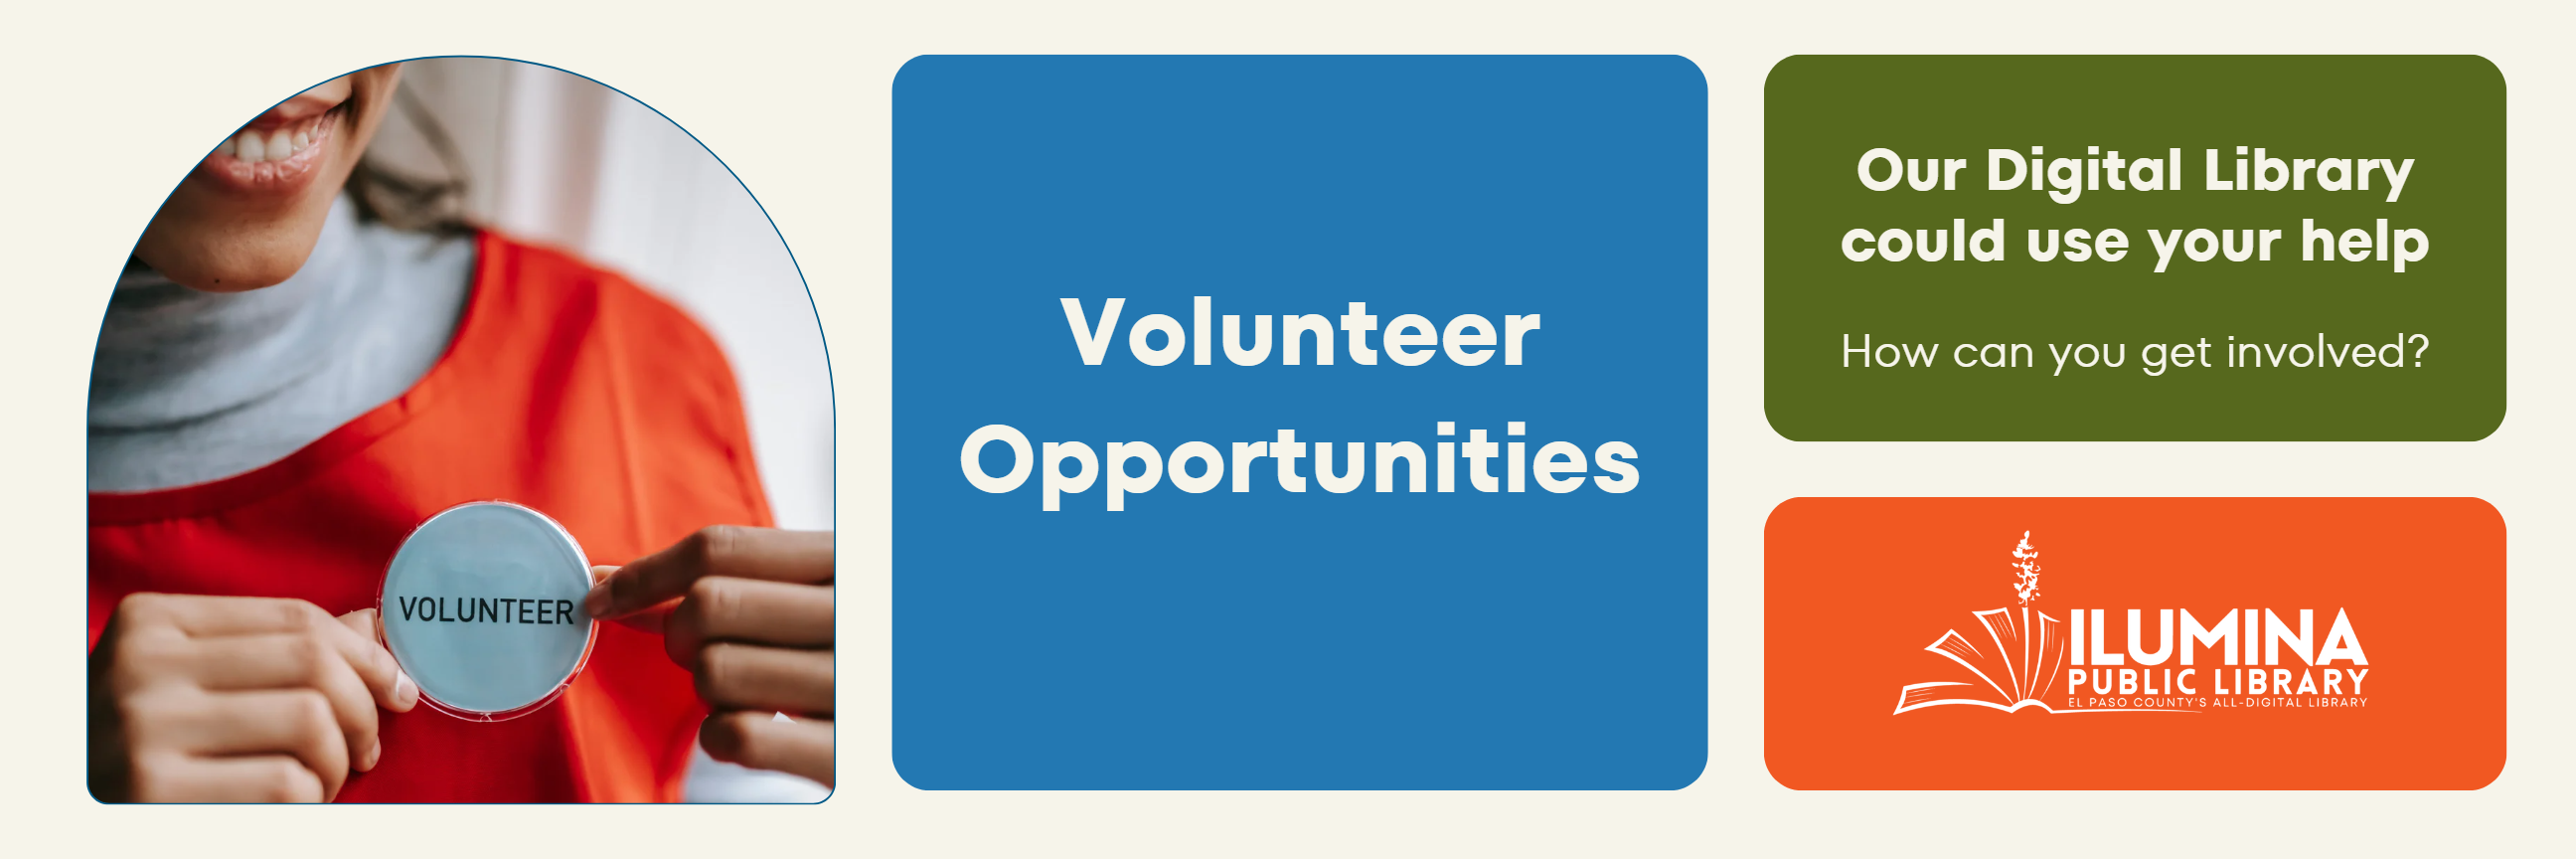 banner with the words "Volunteer Opportunities", a picture of a person smiling holding a pin on their shirt saying "volunteer"